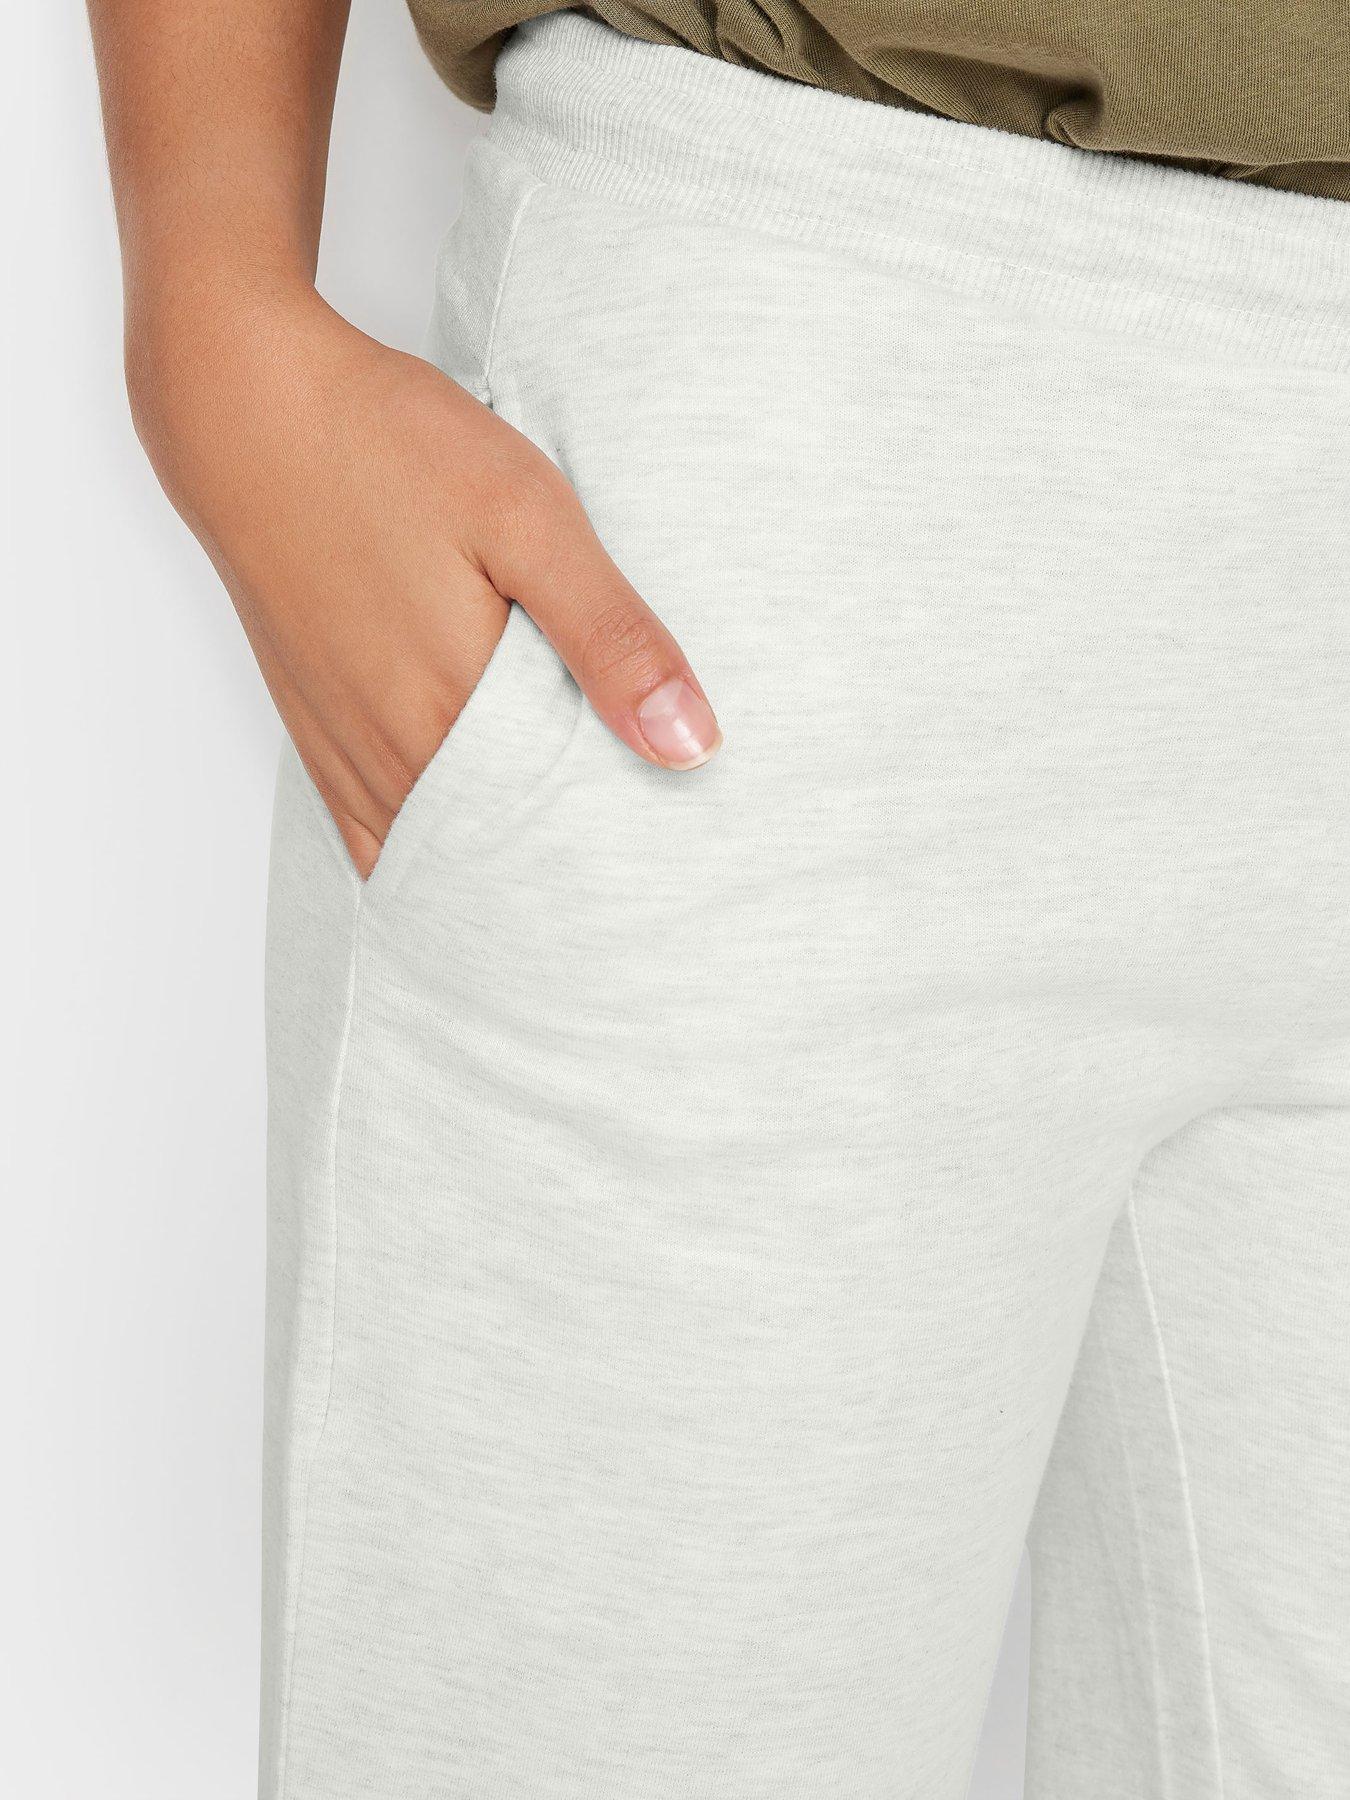 Ok Girl high waisted sweatpants two-piece in gray marl